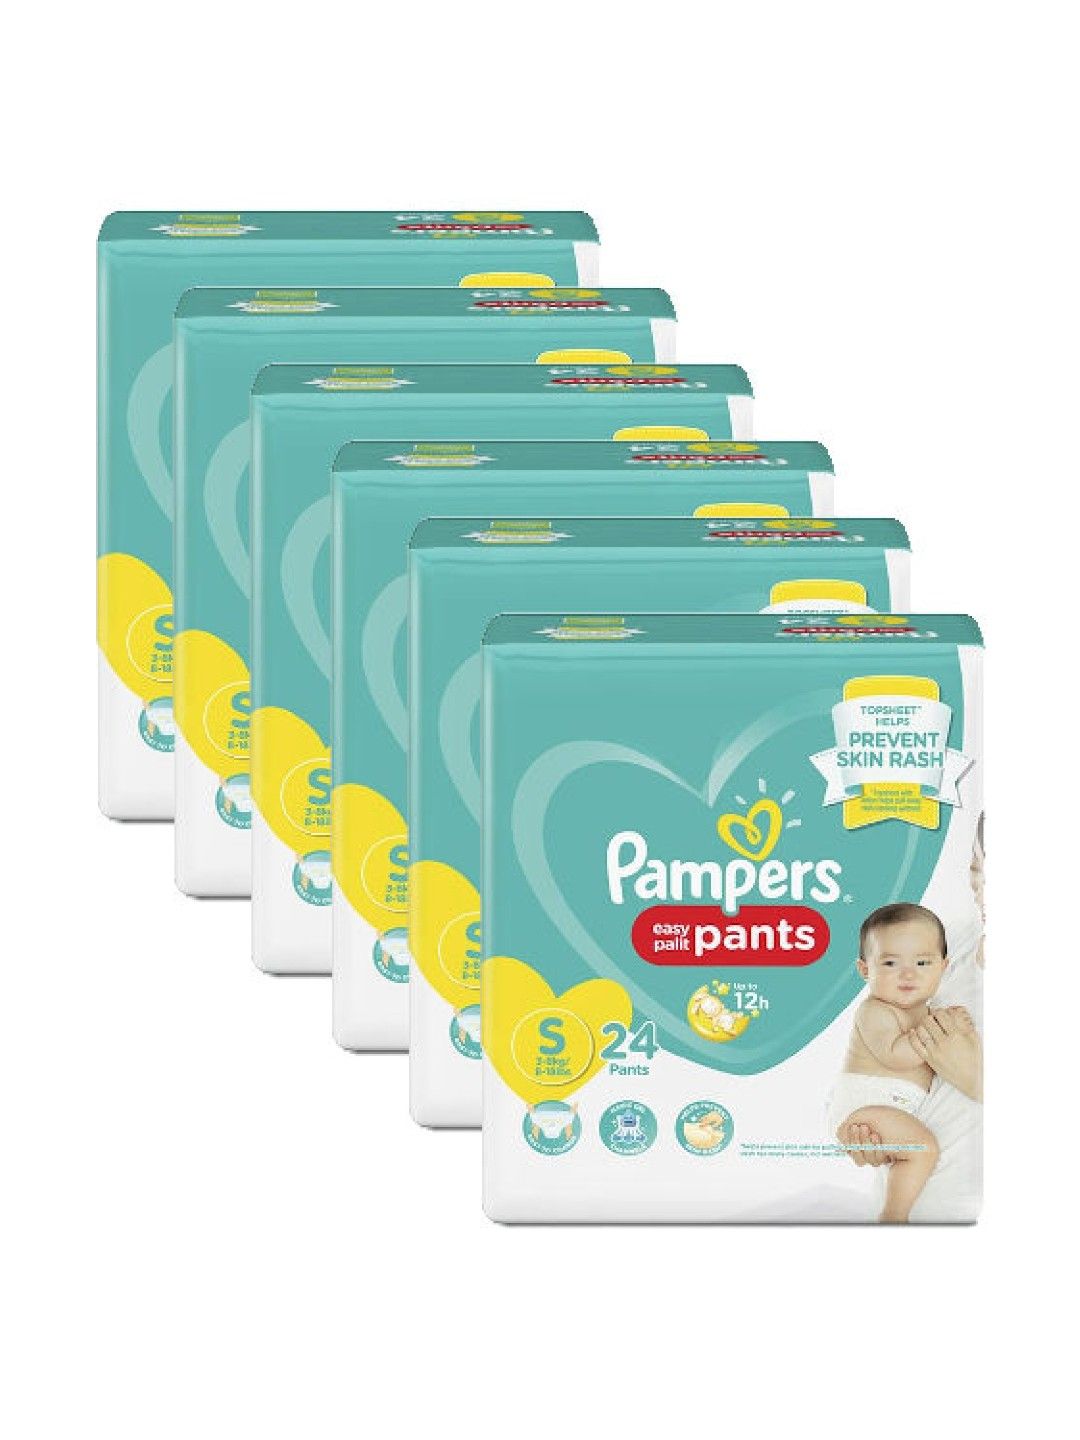 Pampers Premium Care Pants, Large size baby diapers (LG), 88 Count, Softest  ever Pampers pants & Active Baby Taped Diapers, Medium size diapers, (MD)  62 count, taped style custom fit | Price History